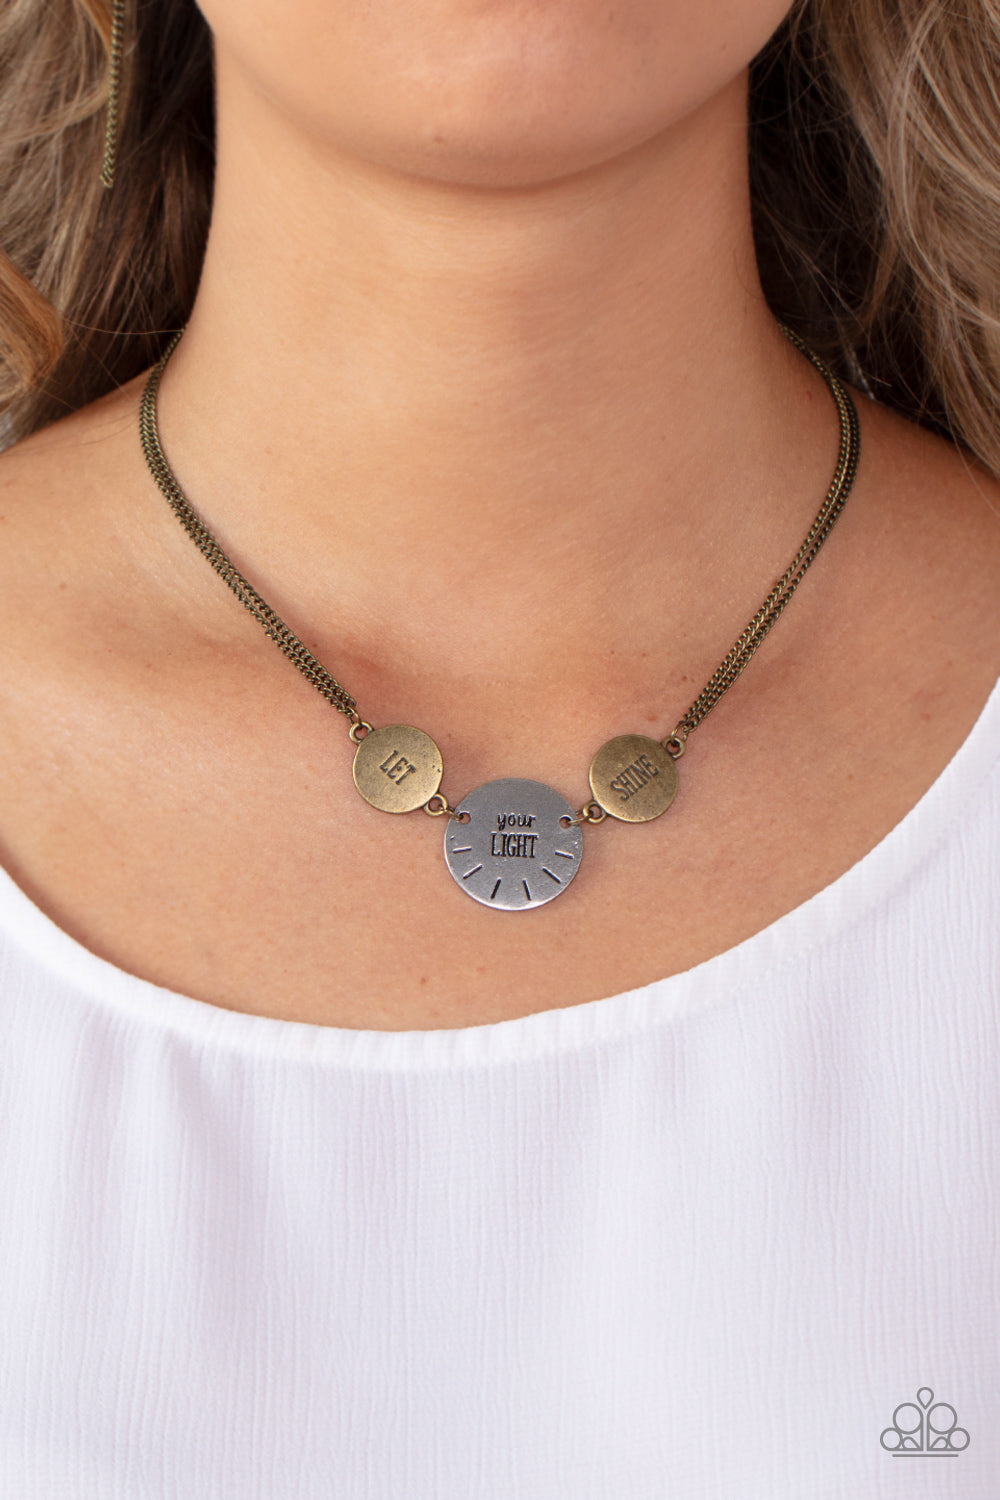 Paparazzi Accessories - Shine Your Light - Brass Necklaces individually stamped in "Let," "Your Light," Shine," a pair of rustic brass discs links with a single silver disc, combining into an inspirational phrase below the collar. Features an adjustable clasp closure.  Sold as one individual necklace. Includes one pair of matching earrings.